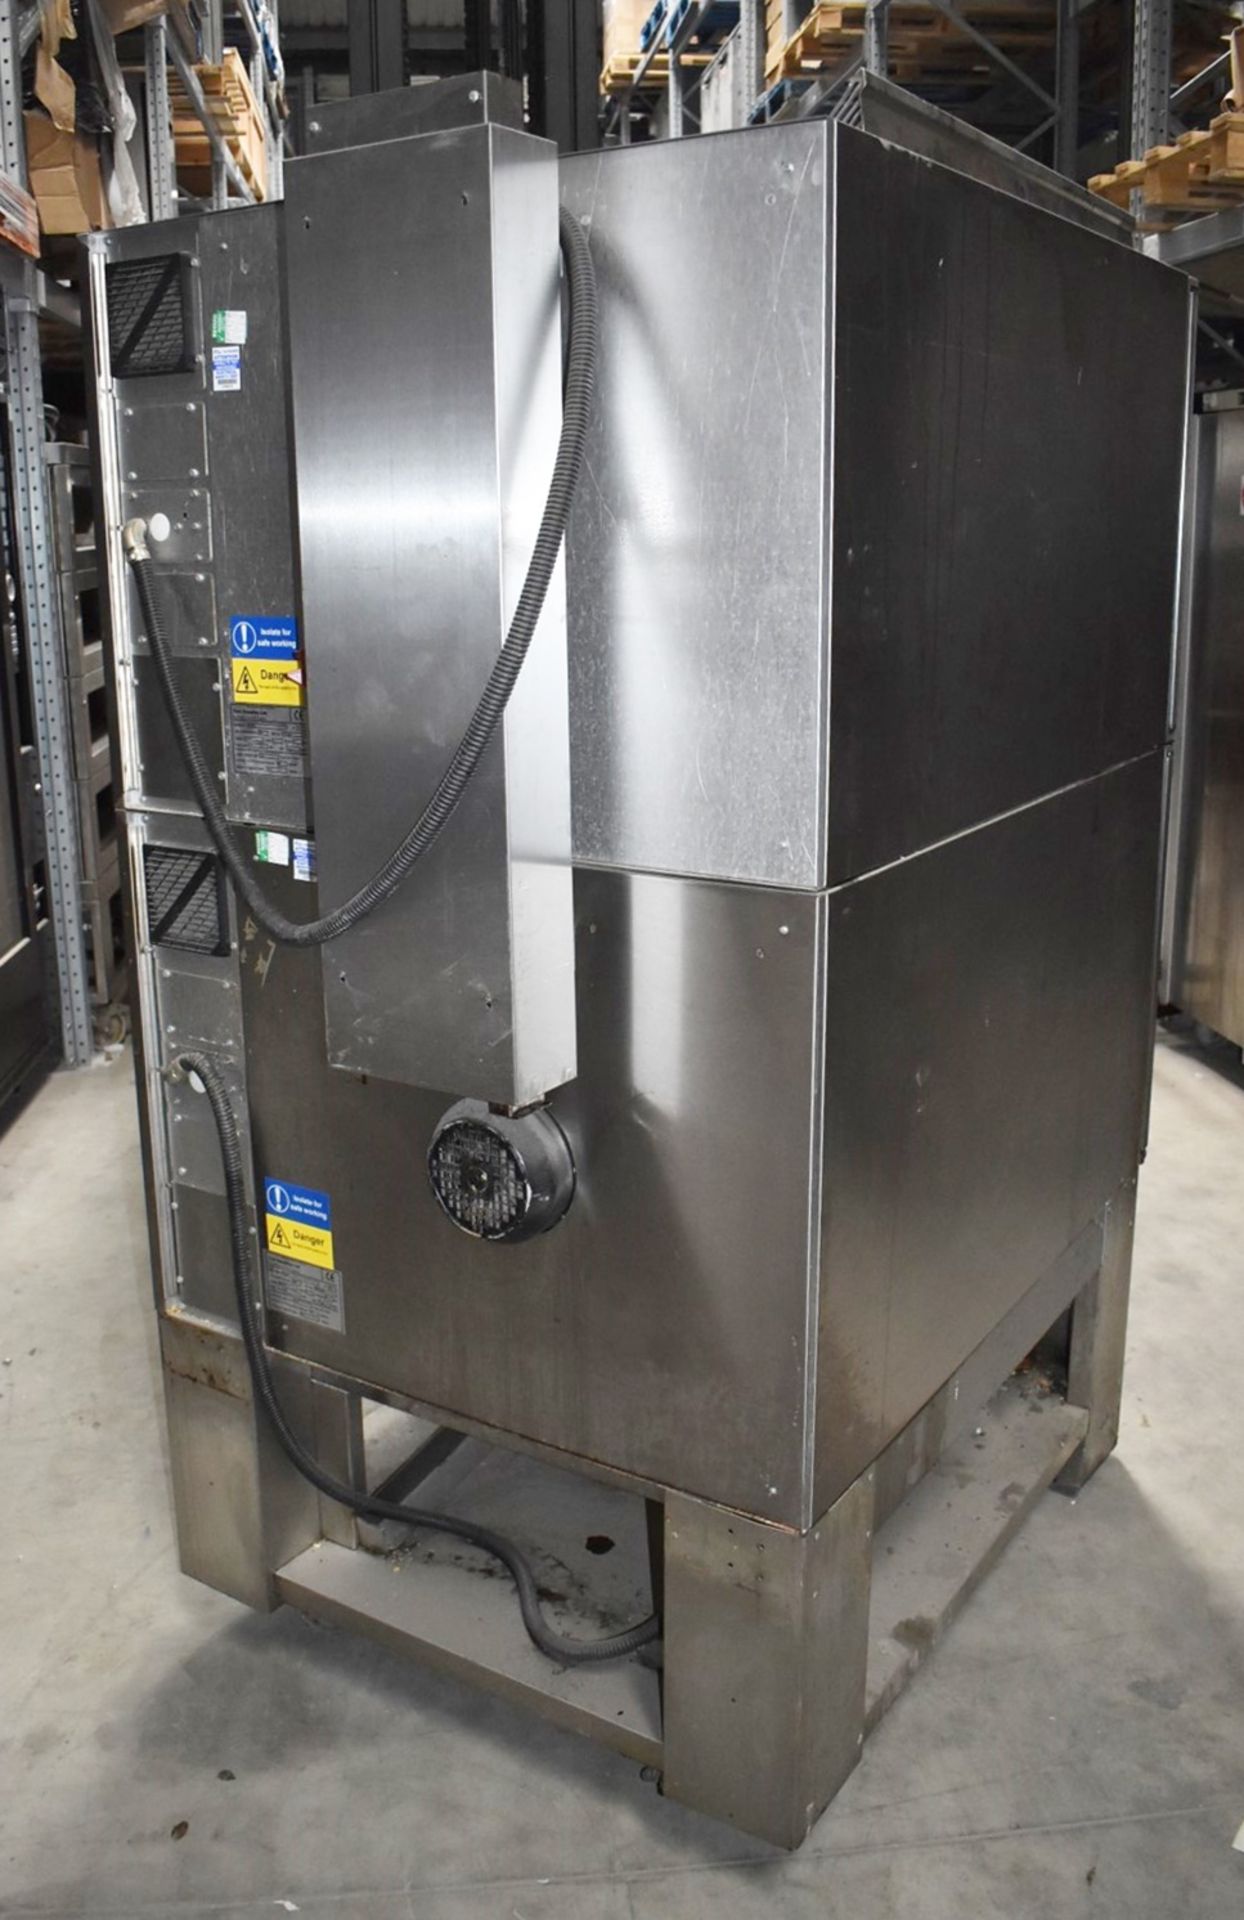 1 x Tom Chandley TC5 Double Convection Bakery Oven - Recently Removed From a Major Supermarket Store - Image 11 of 14